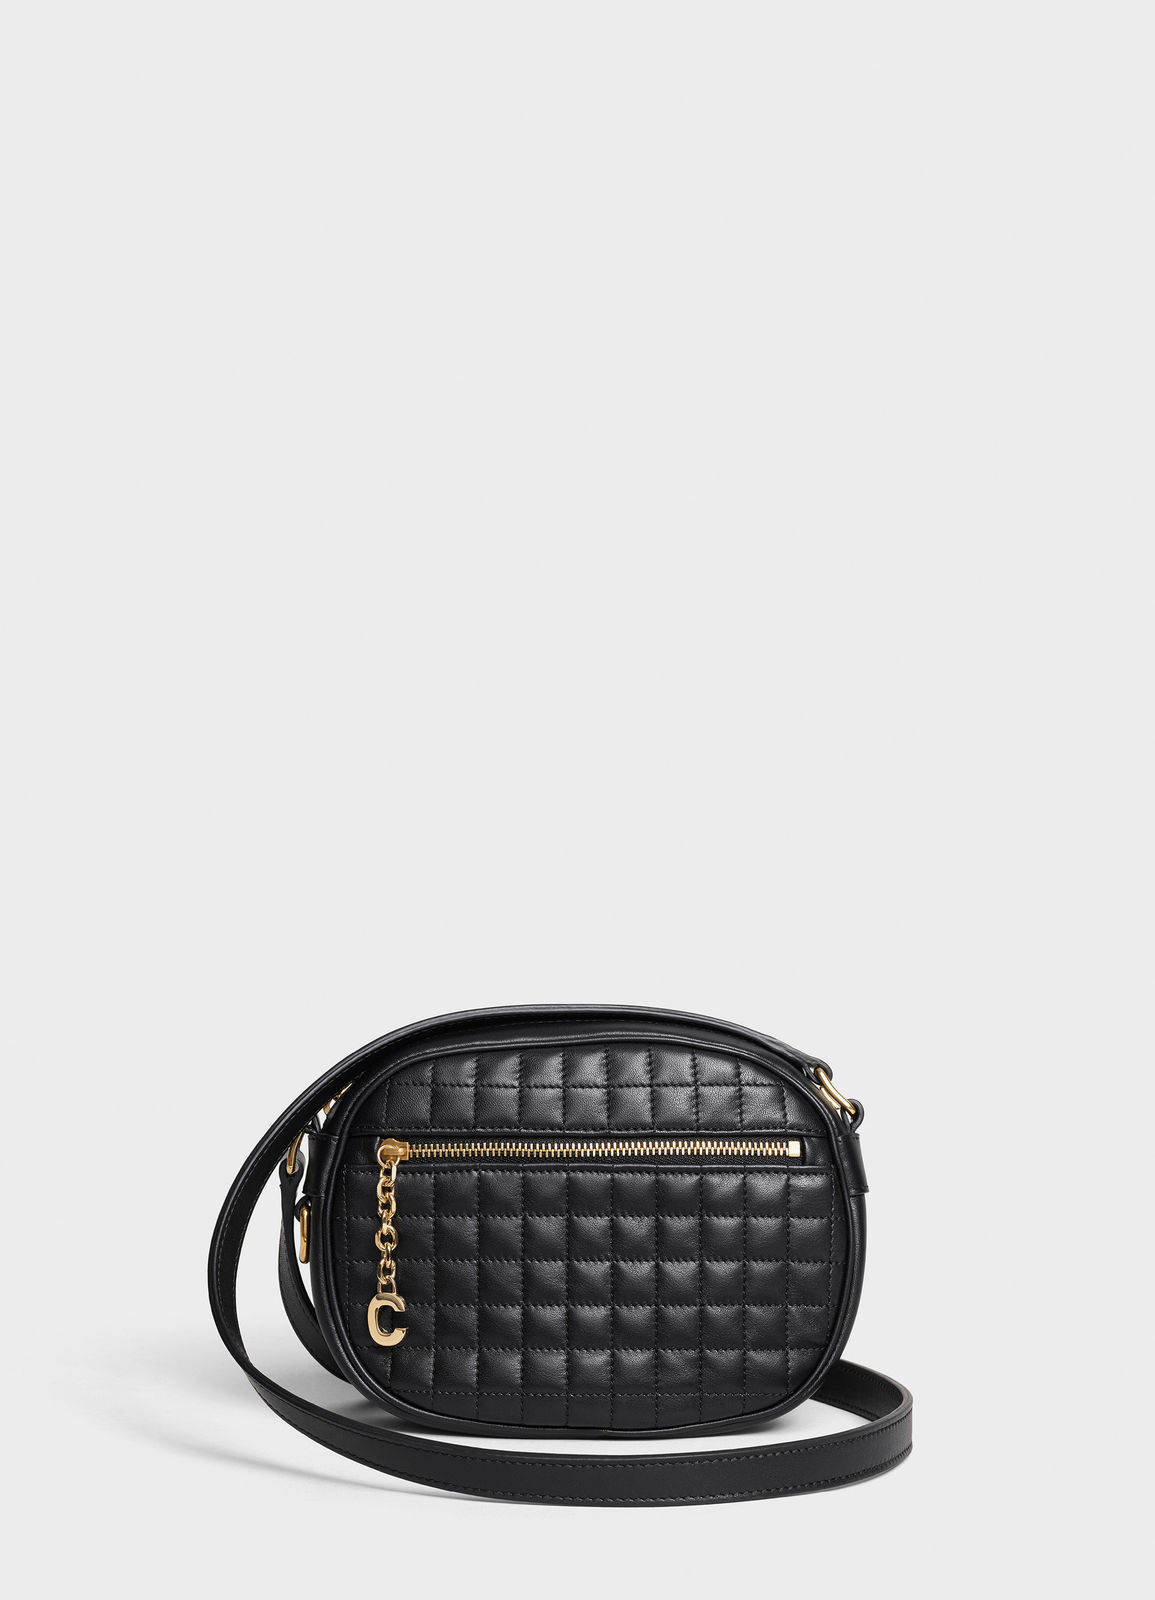 CELINE CROSS BODY SMALL C CHARM BAG IN QUILTED CALFSKIN 188363 BLACK